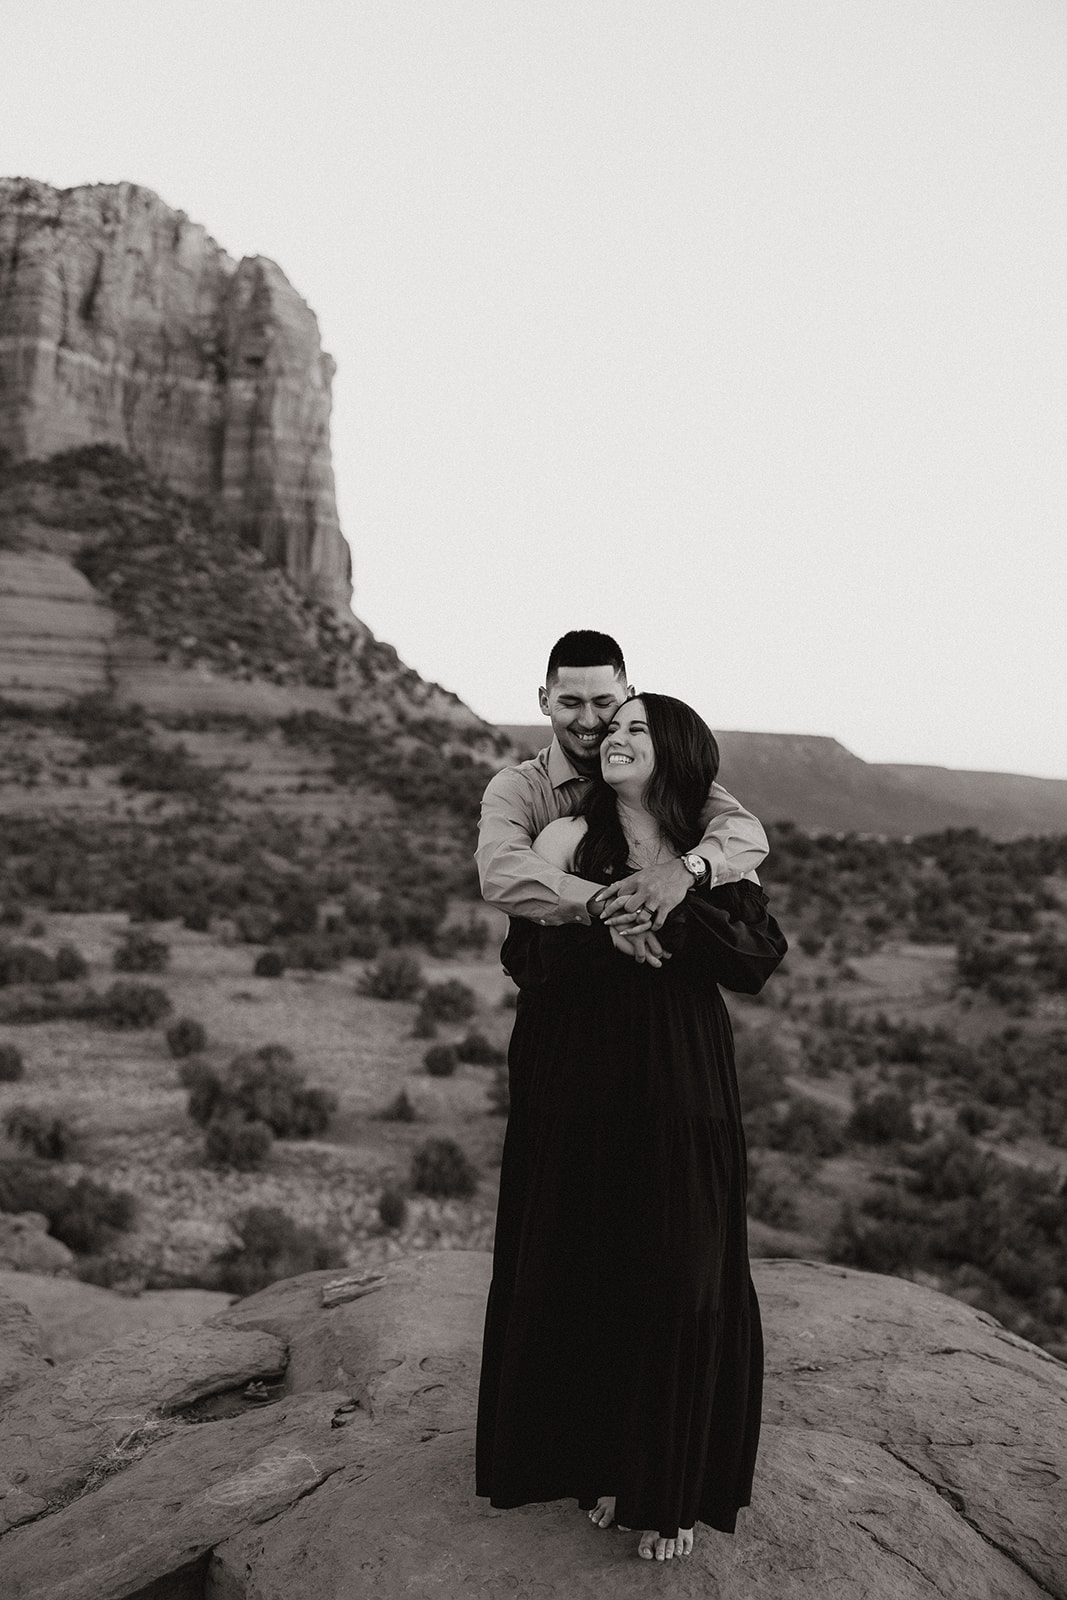 Beautiful couple share a hug with the beautiful Arizona mountains in the backdrop